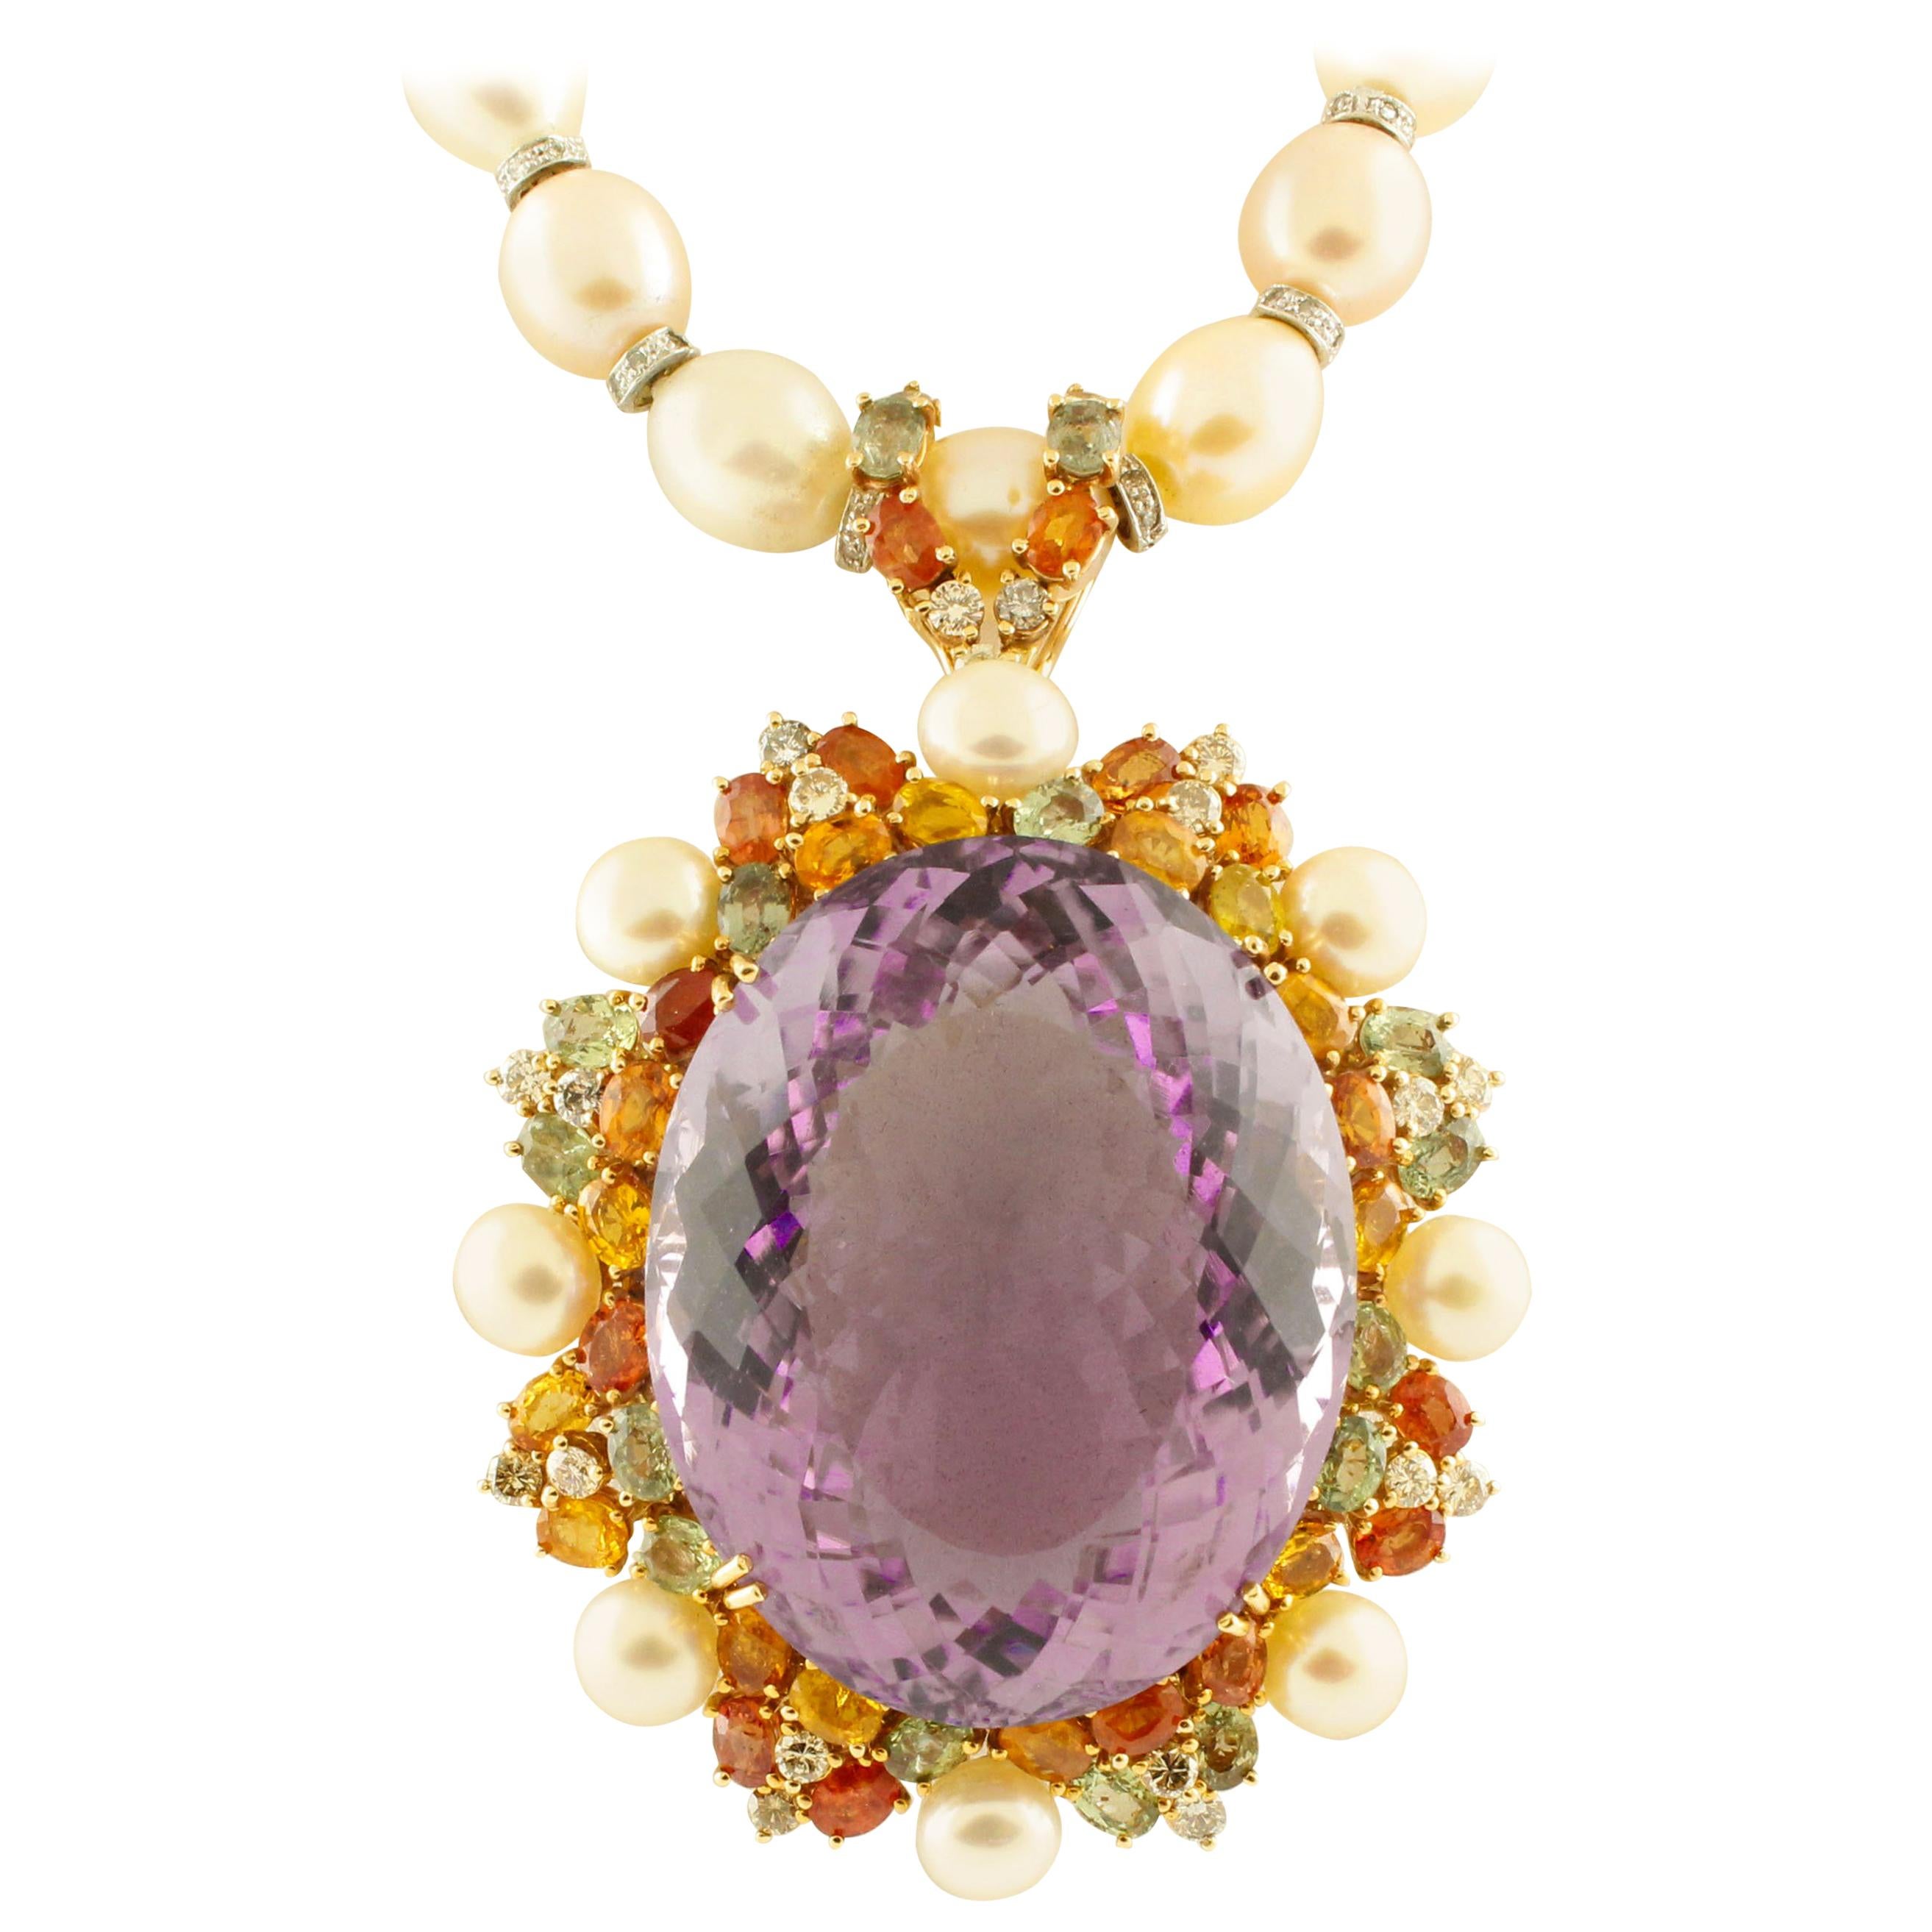 Diamonds Multicolored Sapphires Amethyst White, Light-Pink Pearls Necklace